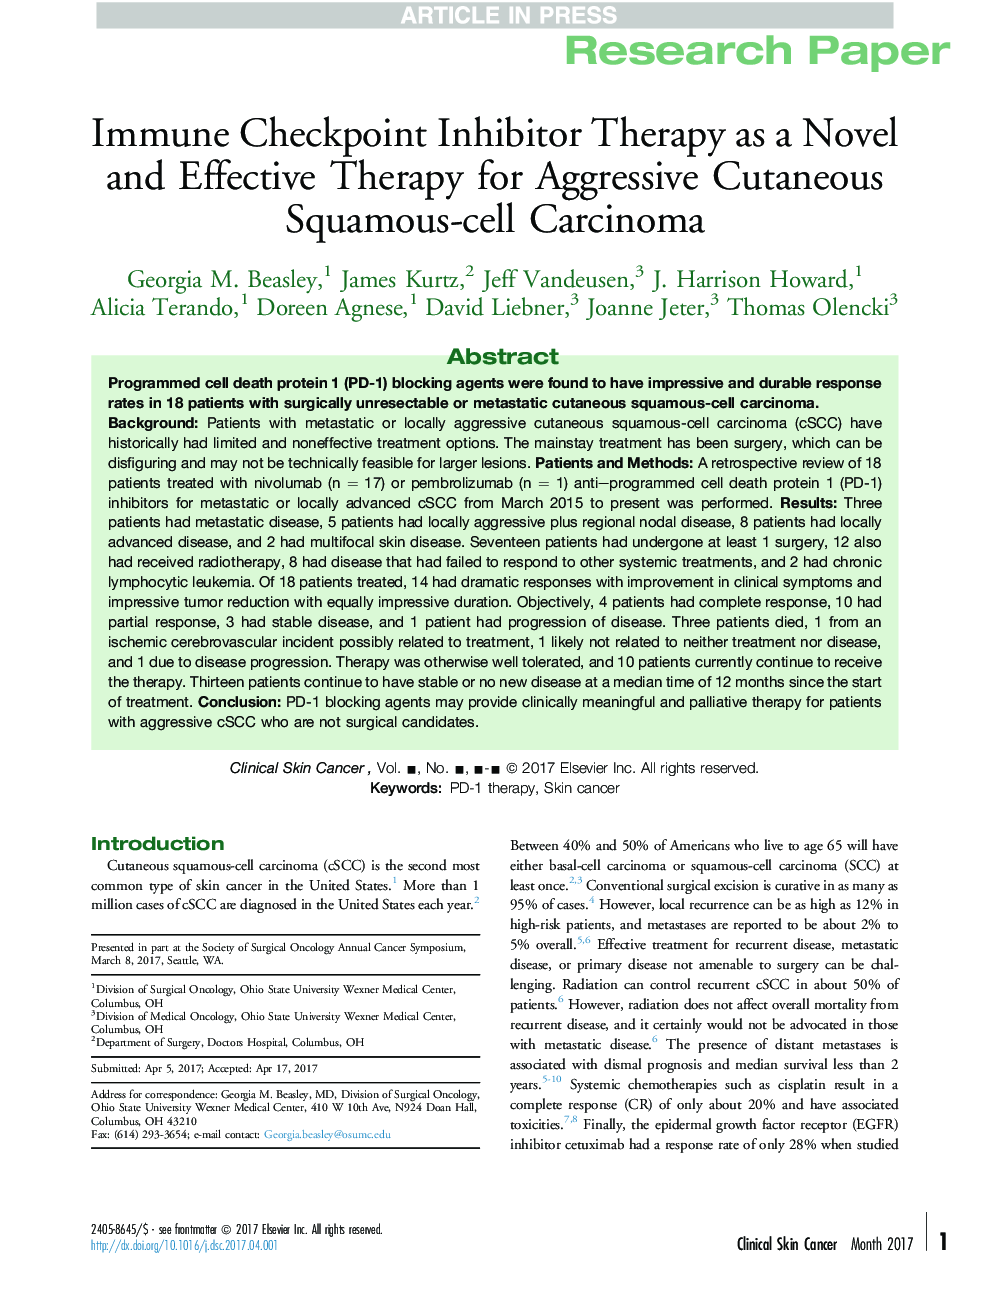 Immune Checkpoint Inhibitor Therapy as a Novel and Effective Therapy for Aggressive Cutaneous Squamous-cell Carcinoma